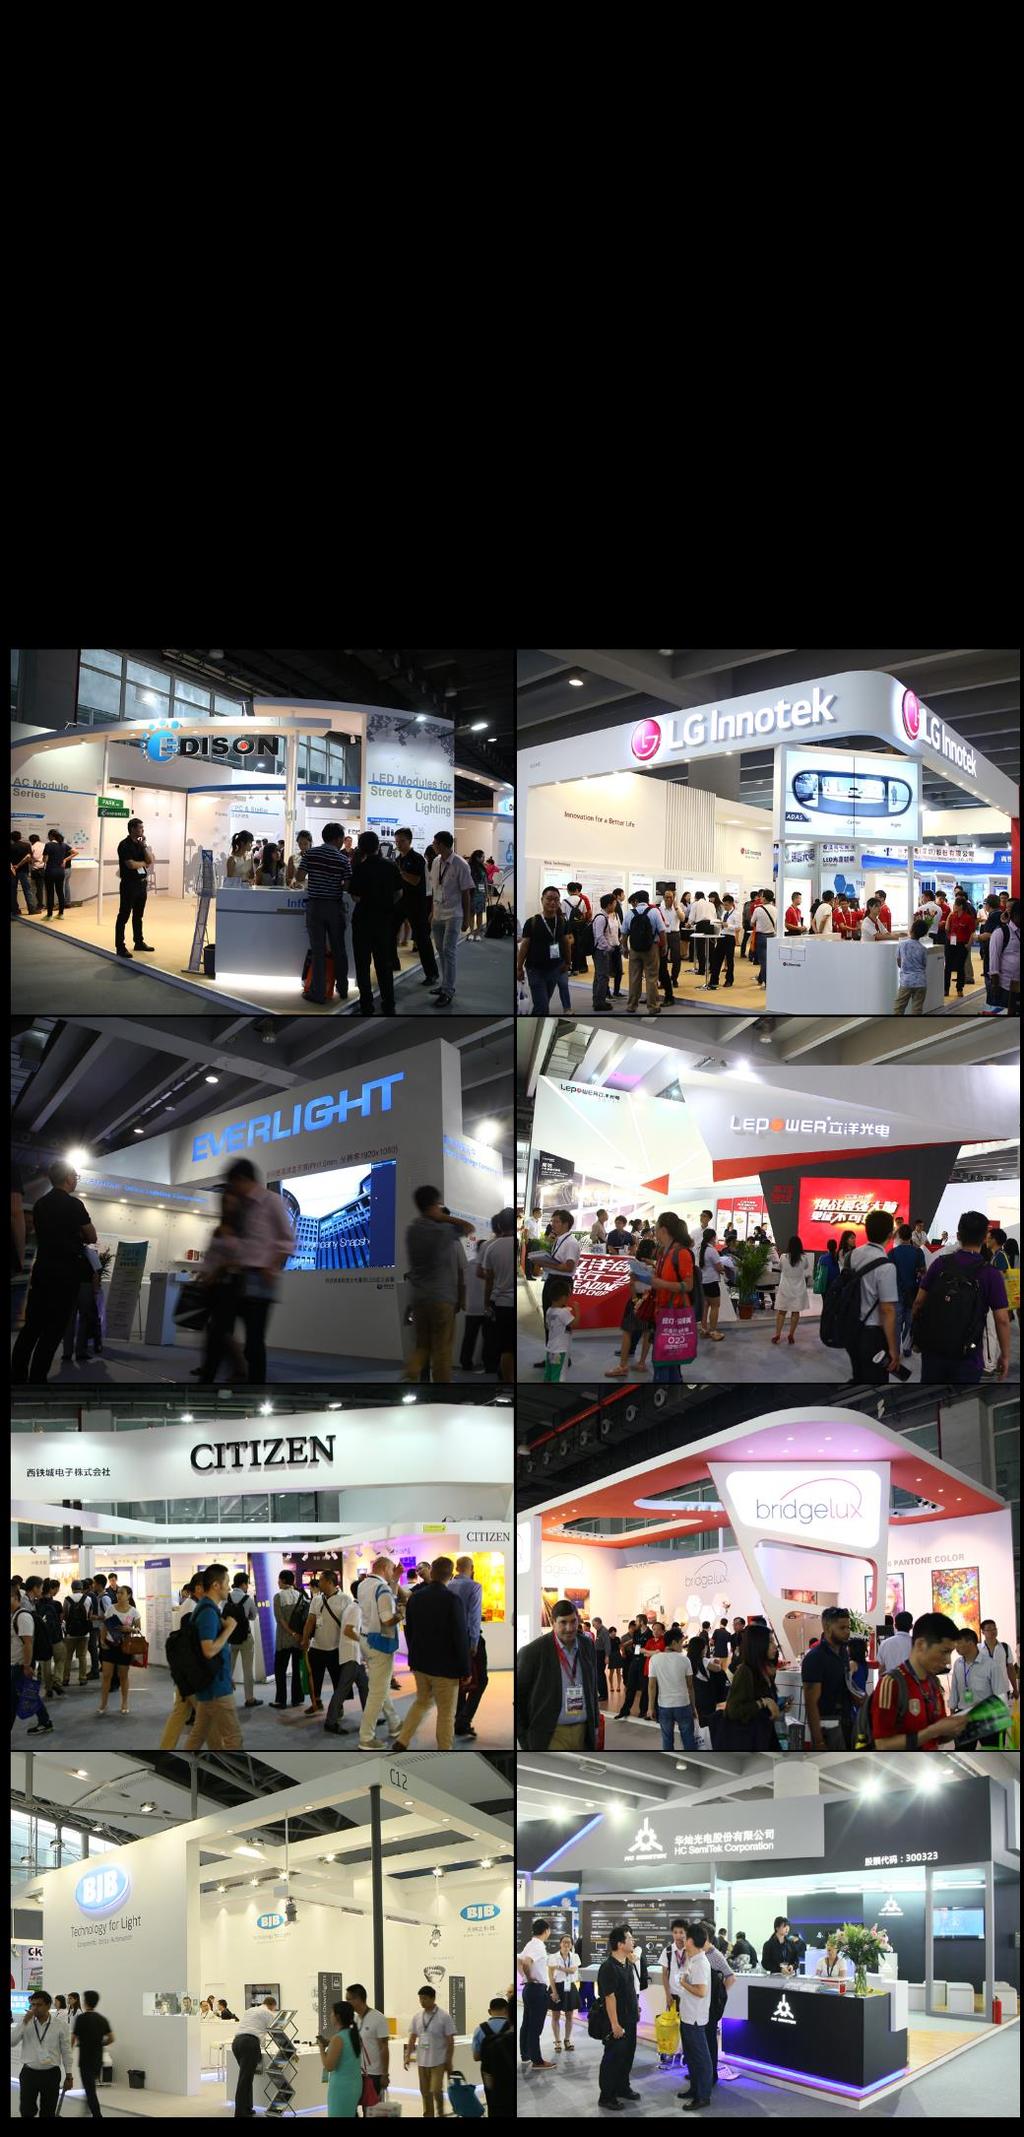 As a leading company in the market, we see Guangzhou International Lighting Exhibition as a great platform for presenting our ideas, marketing our brand, maintaining relationships with our current